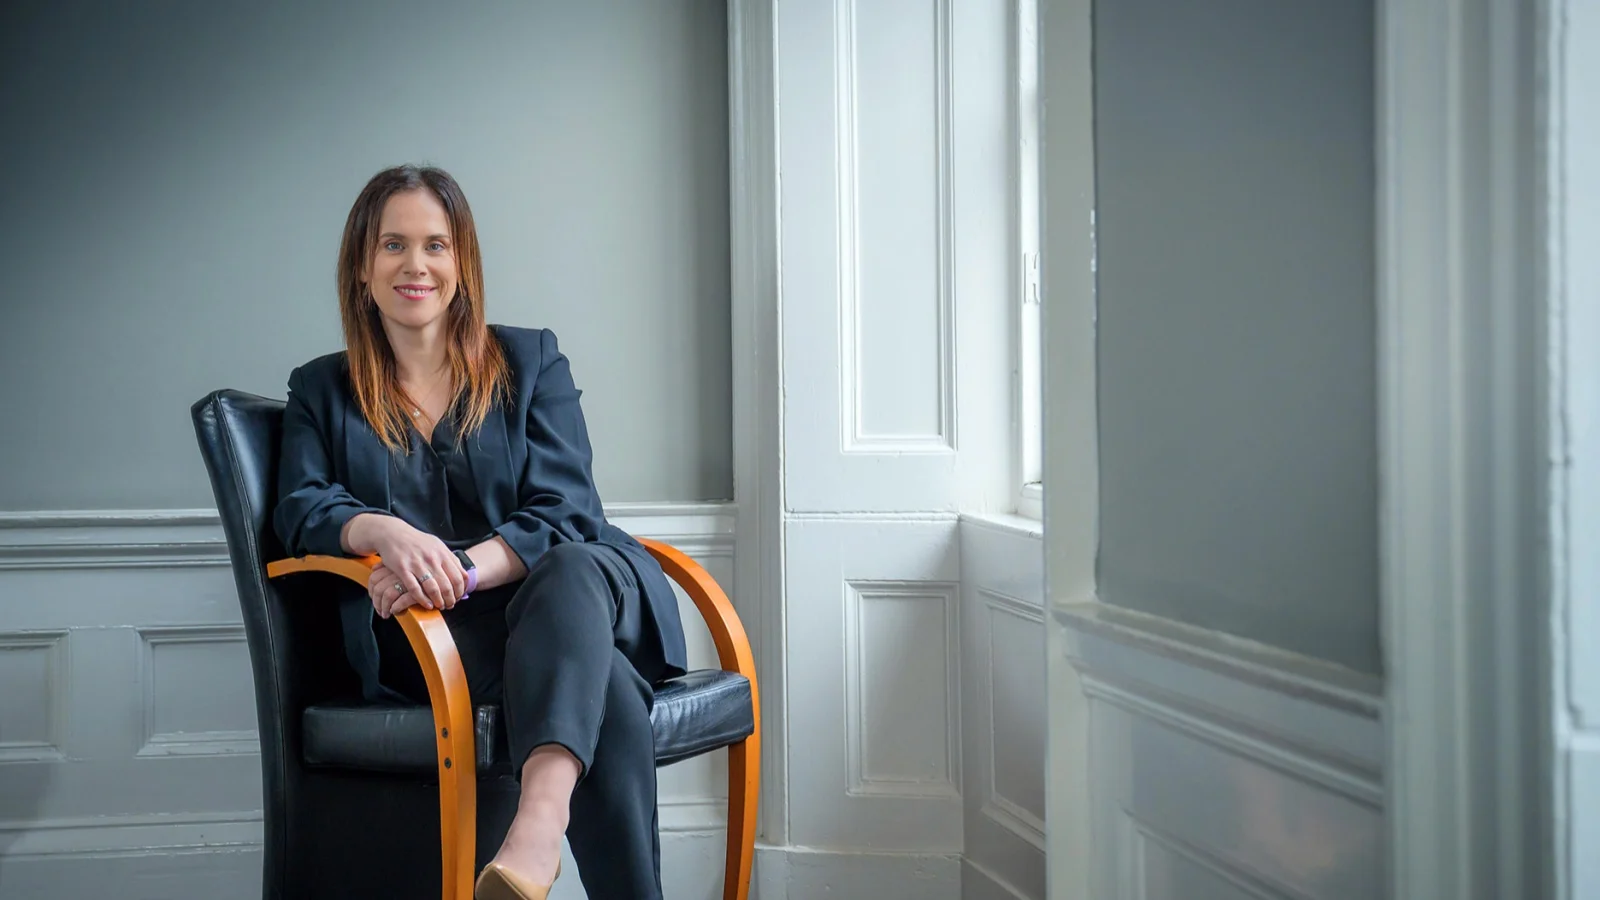 A conversation with Philippa Cunniff, family law and divorce expert